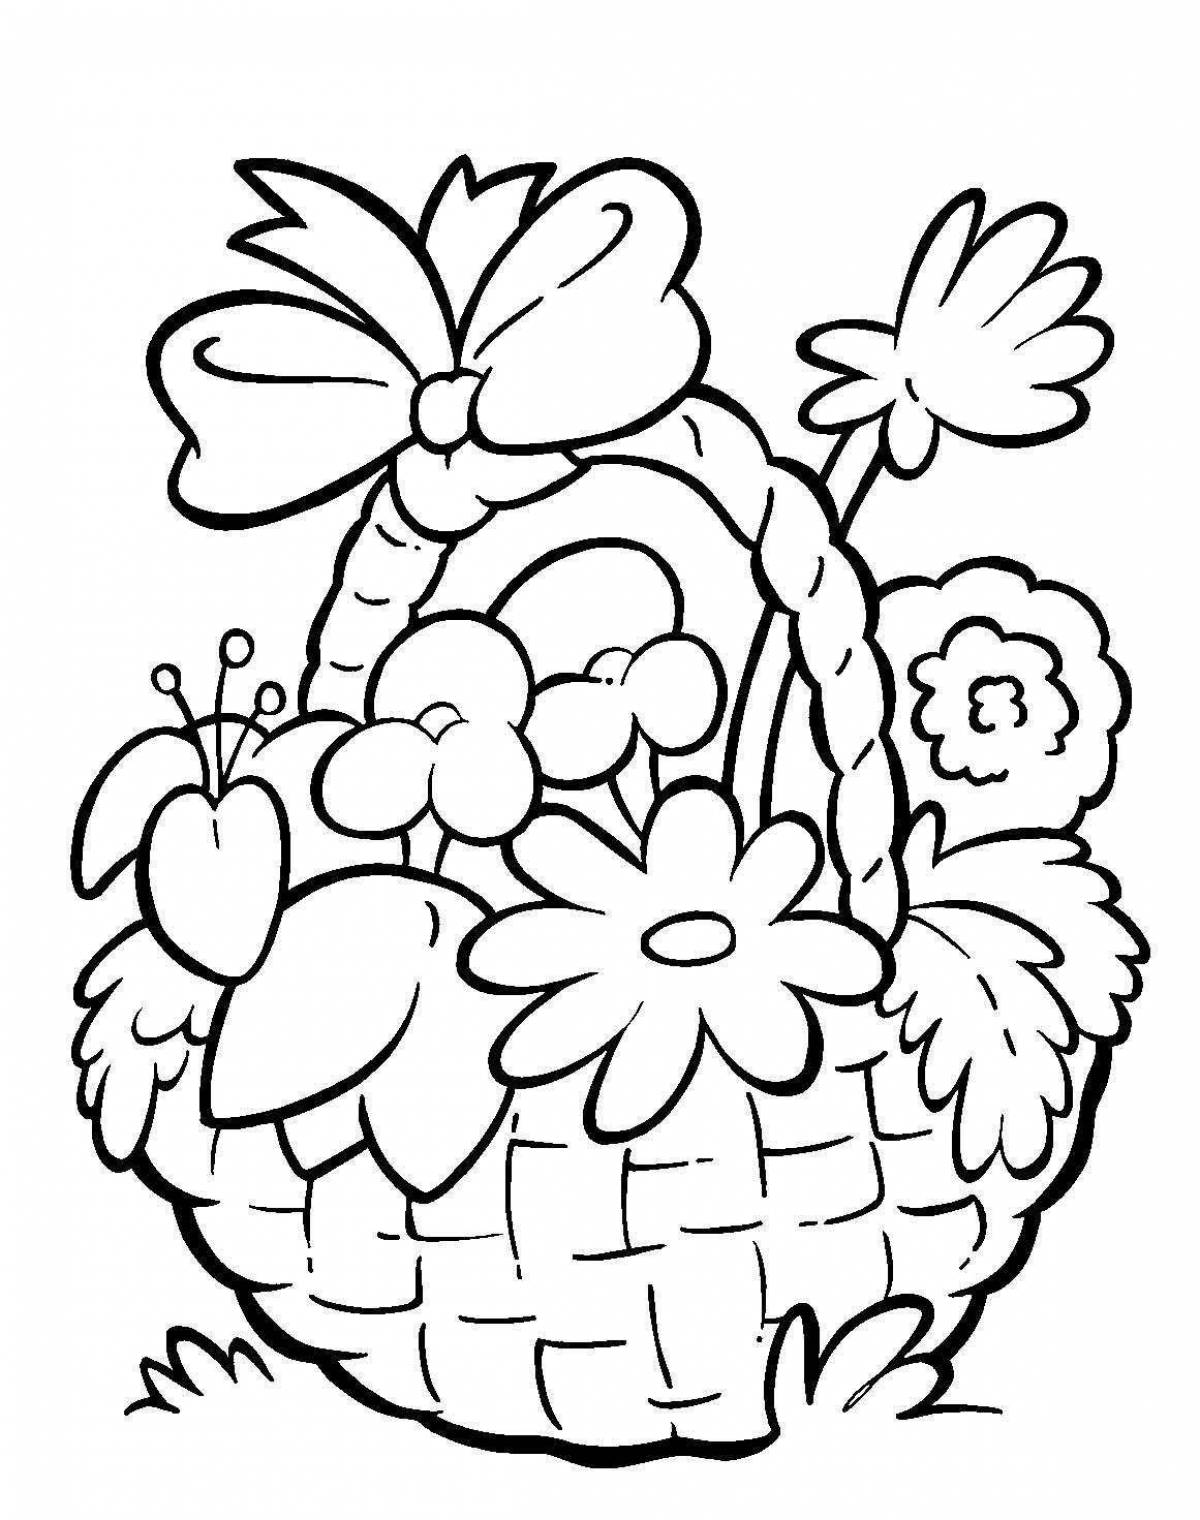 Glitter basket of flowers coloring book